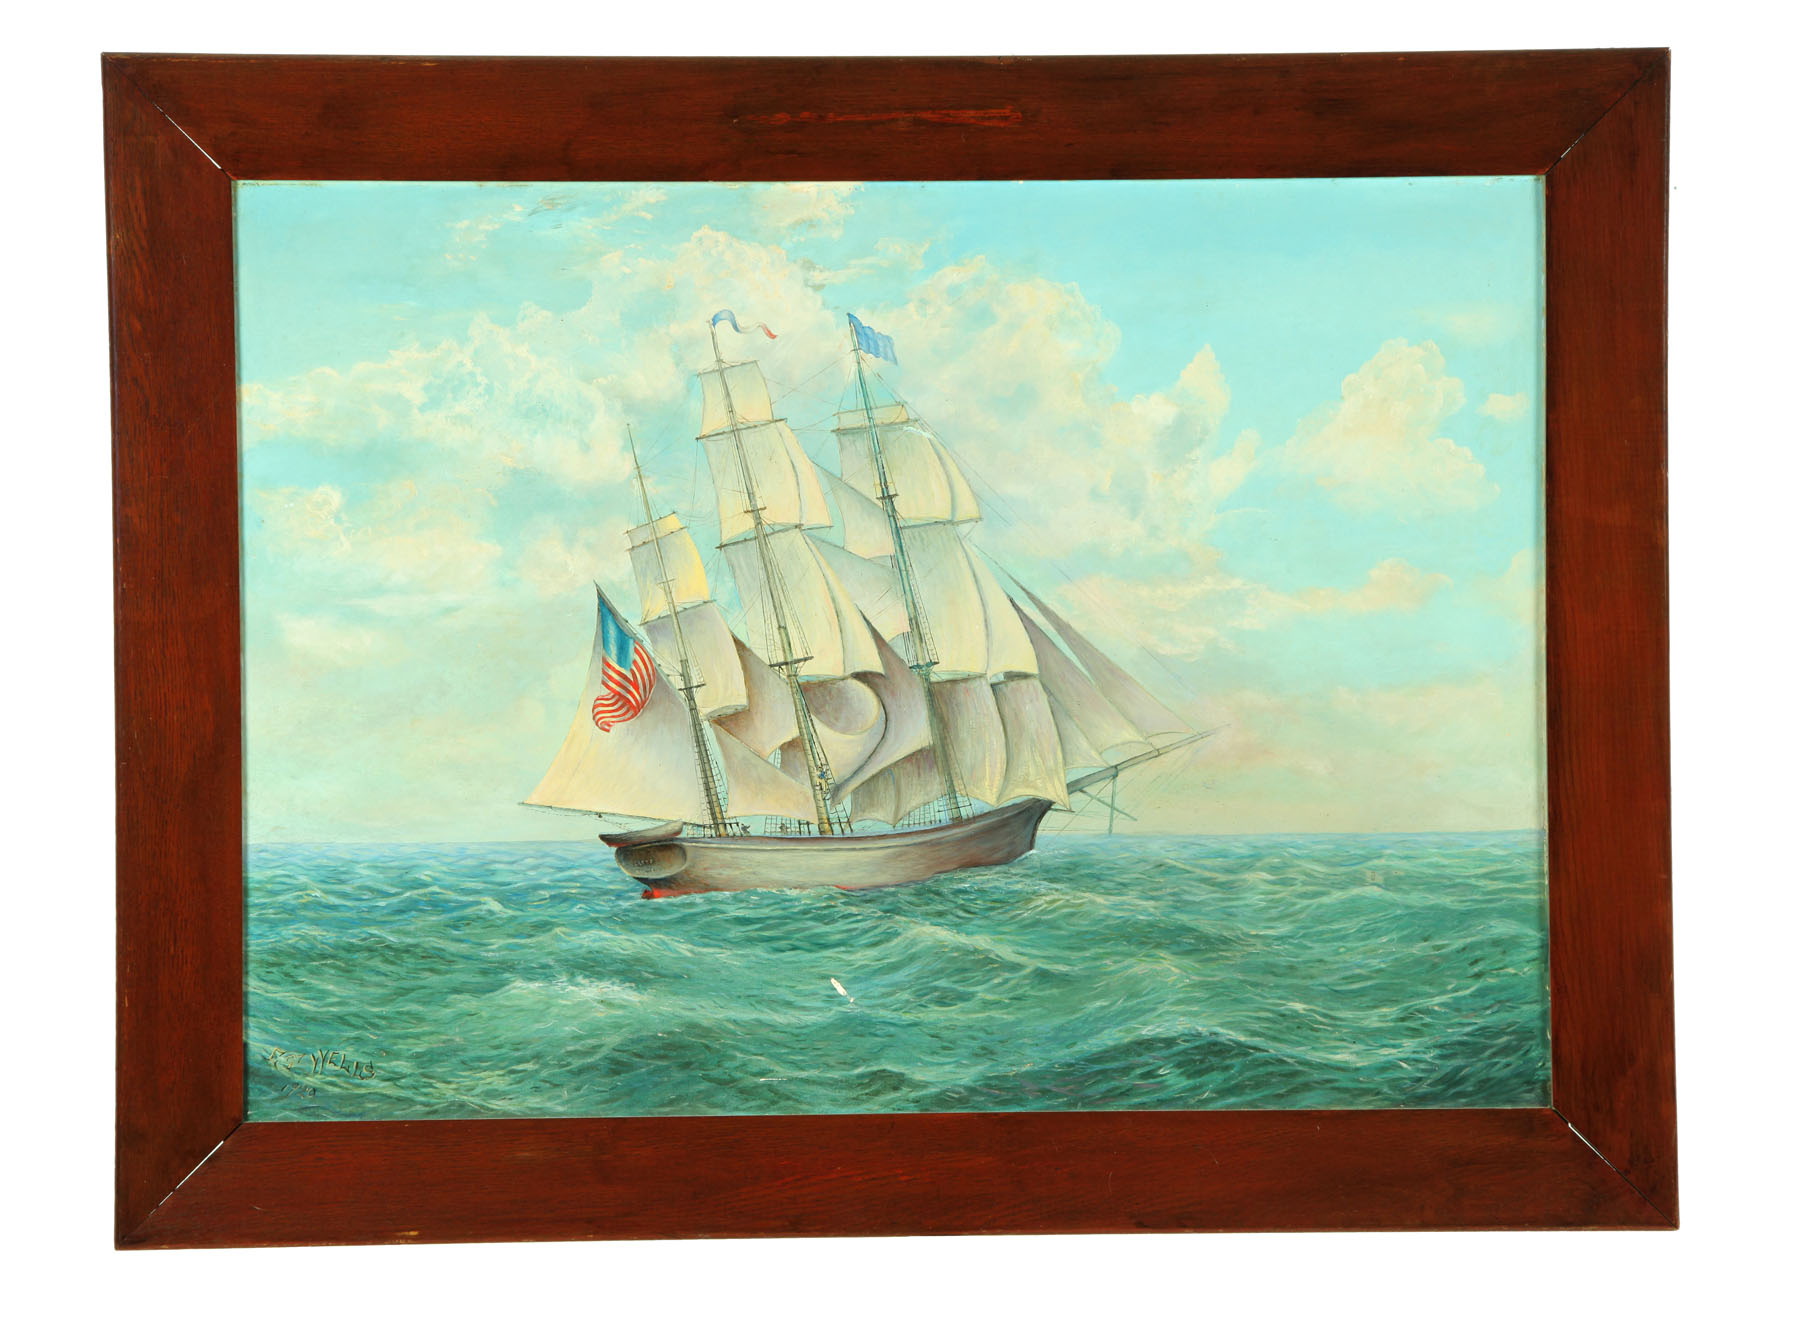  SEASCAPE WITH SHIP BY E T WELLS 1238ec